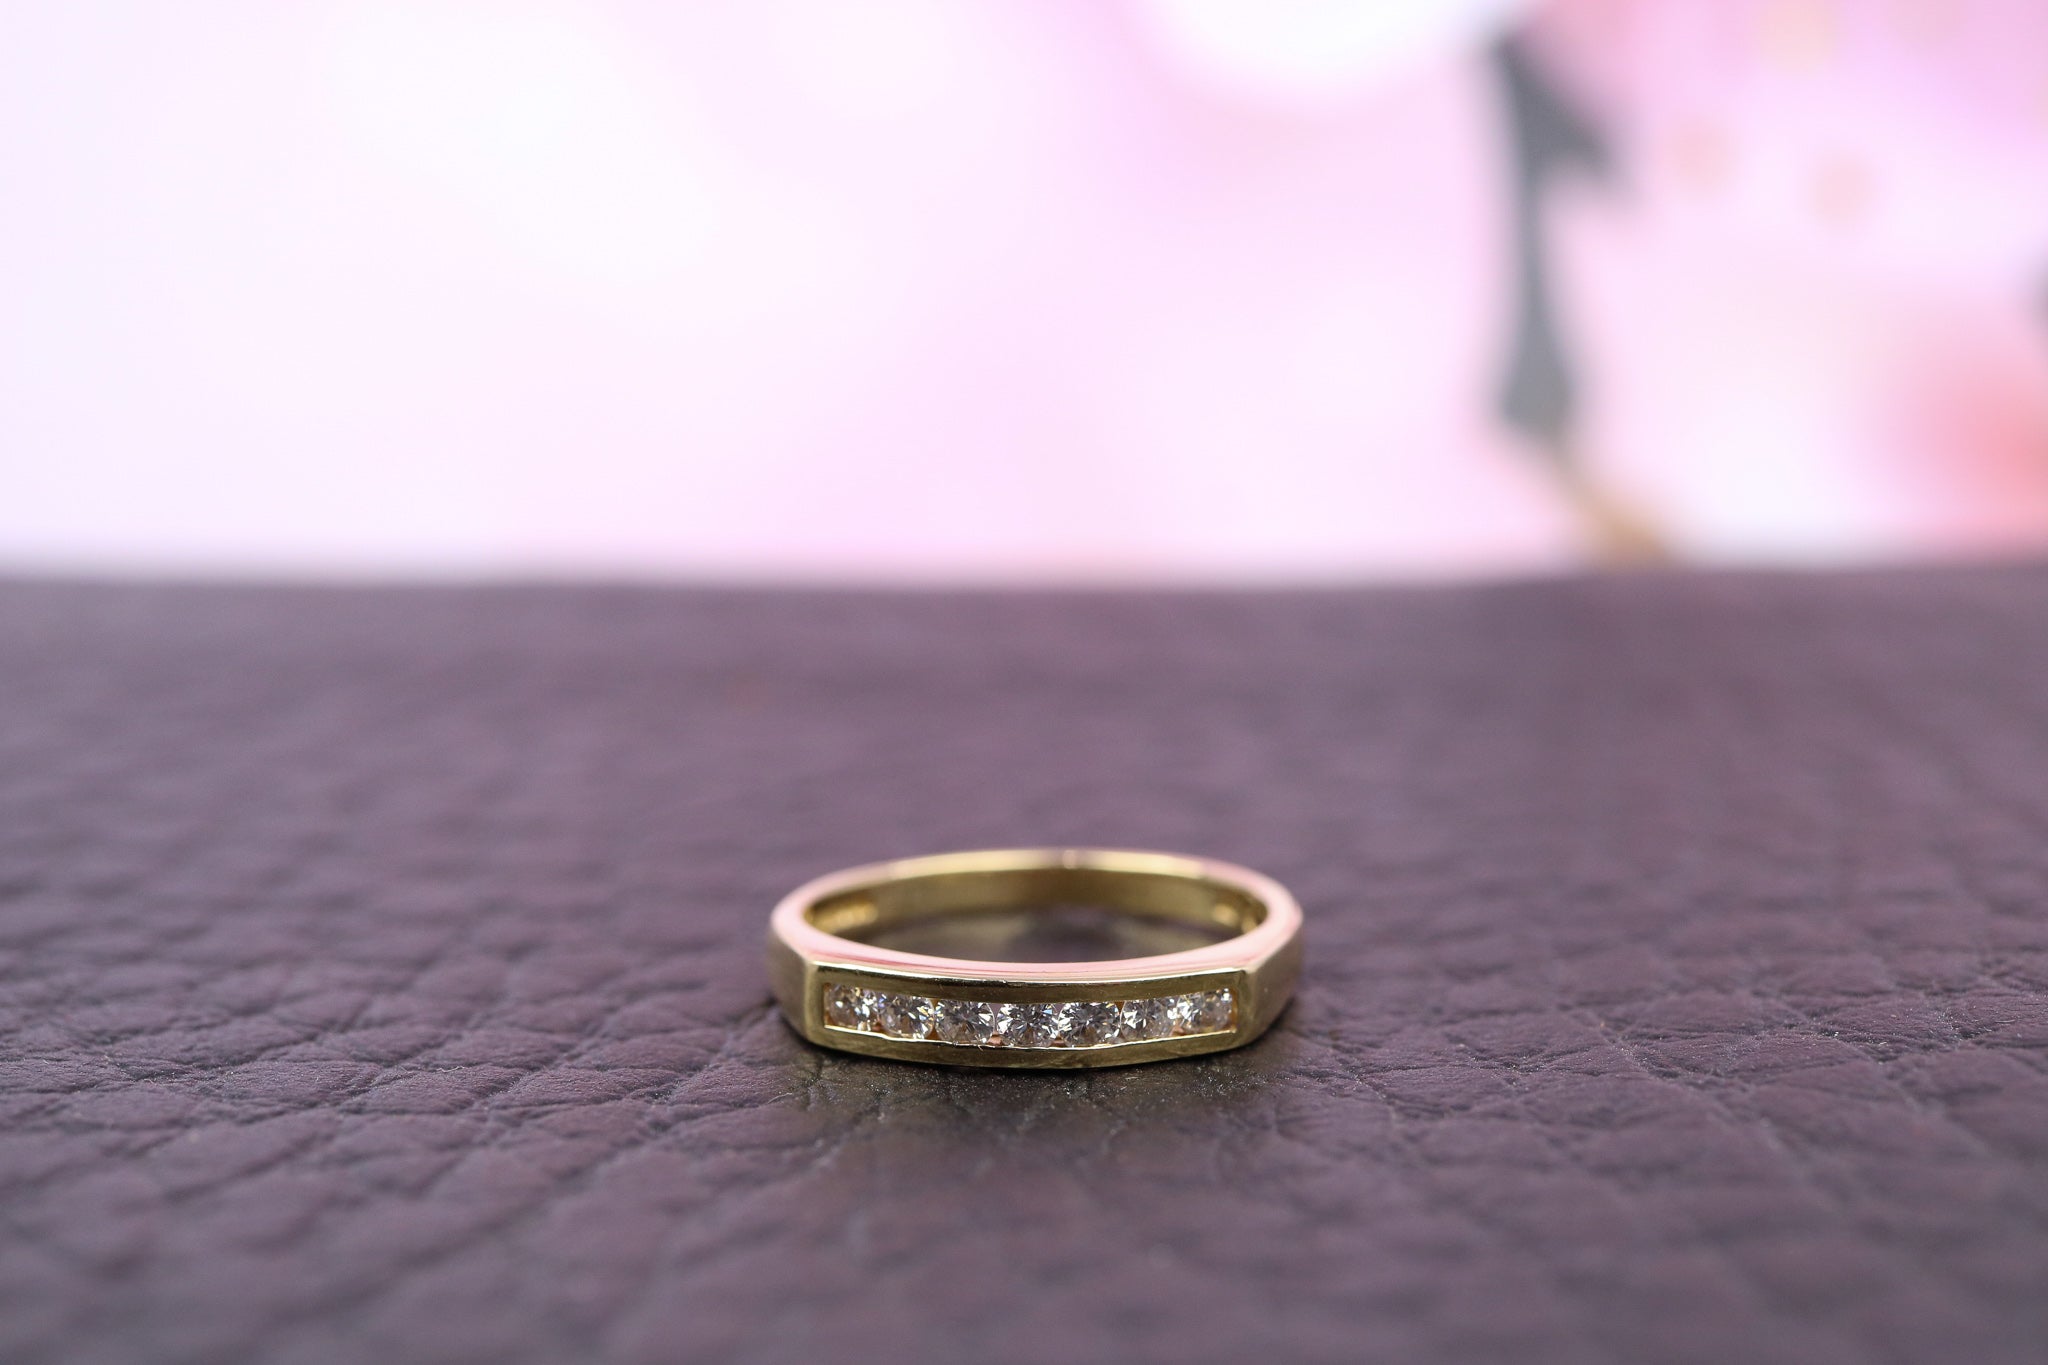 18ct Yellow Gold & Diamond Ring - HJ2476 - Hallmark Jewellers Formby & The Jewellers Bench Widnes